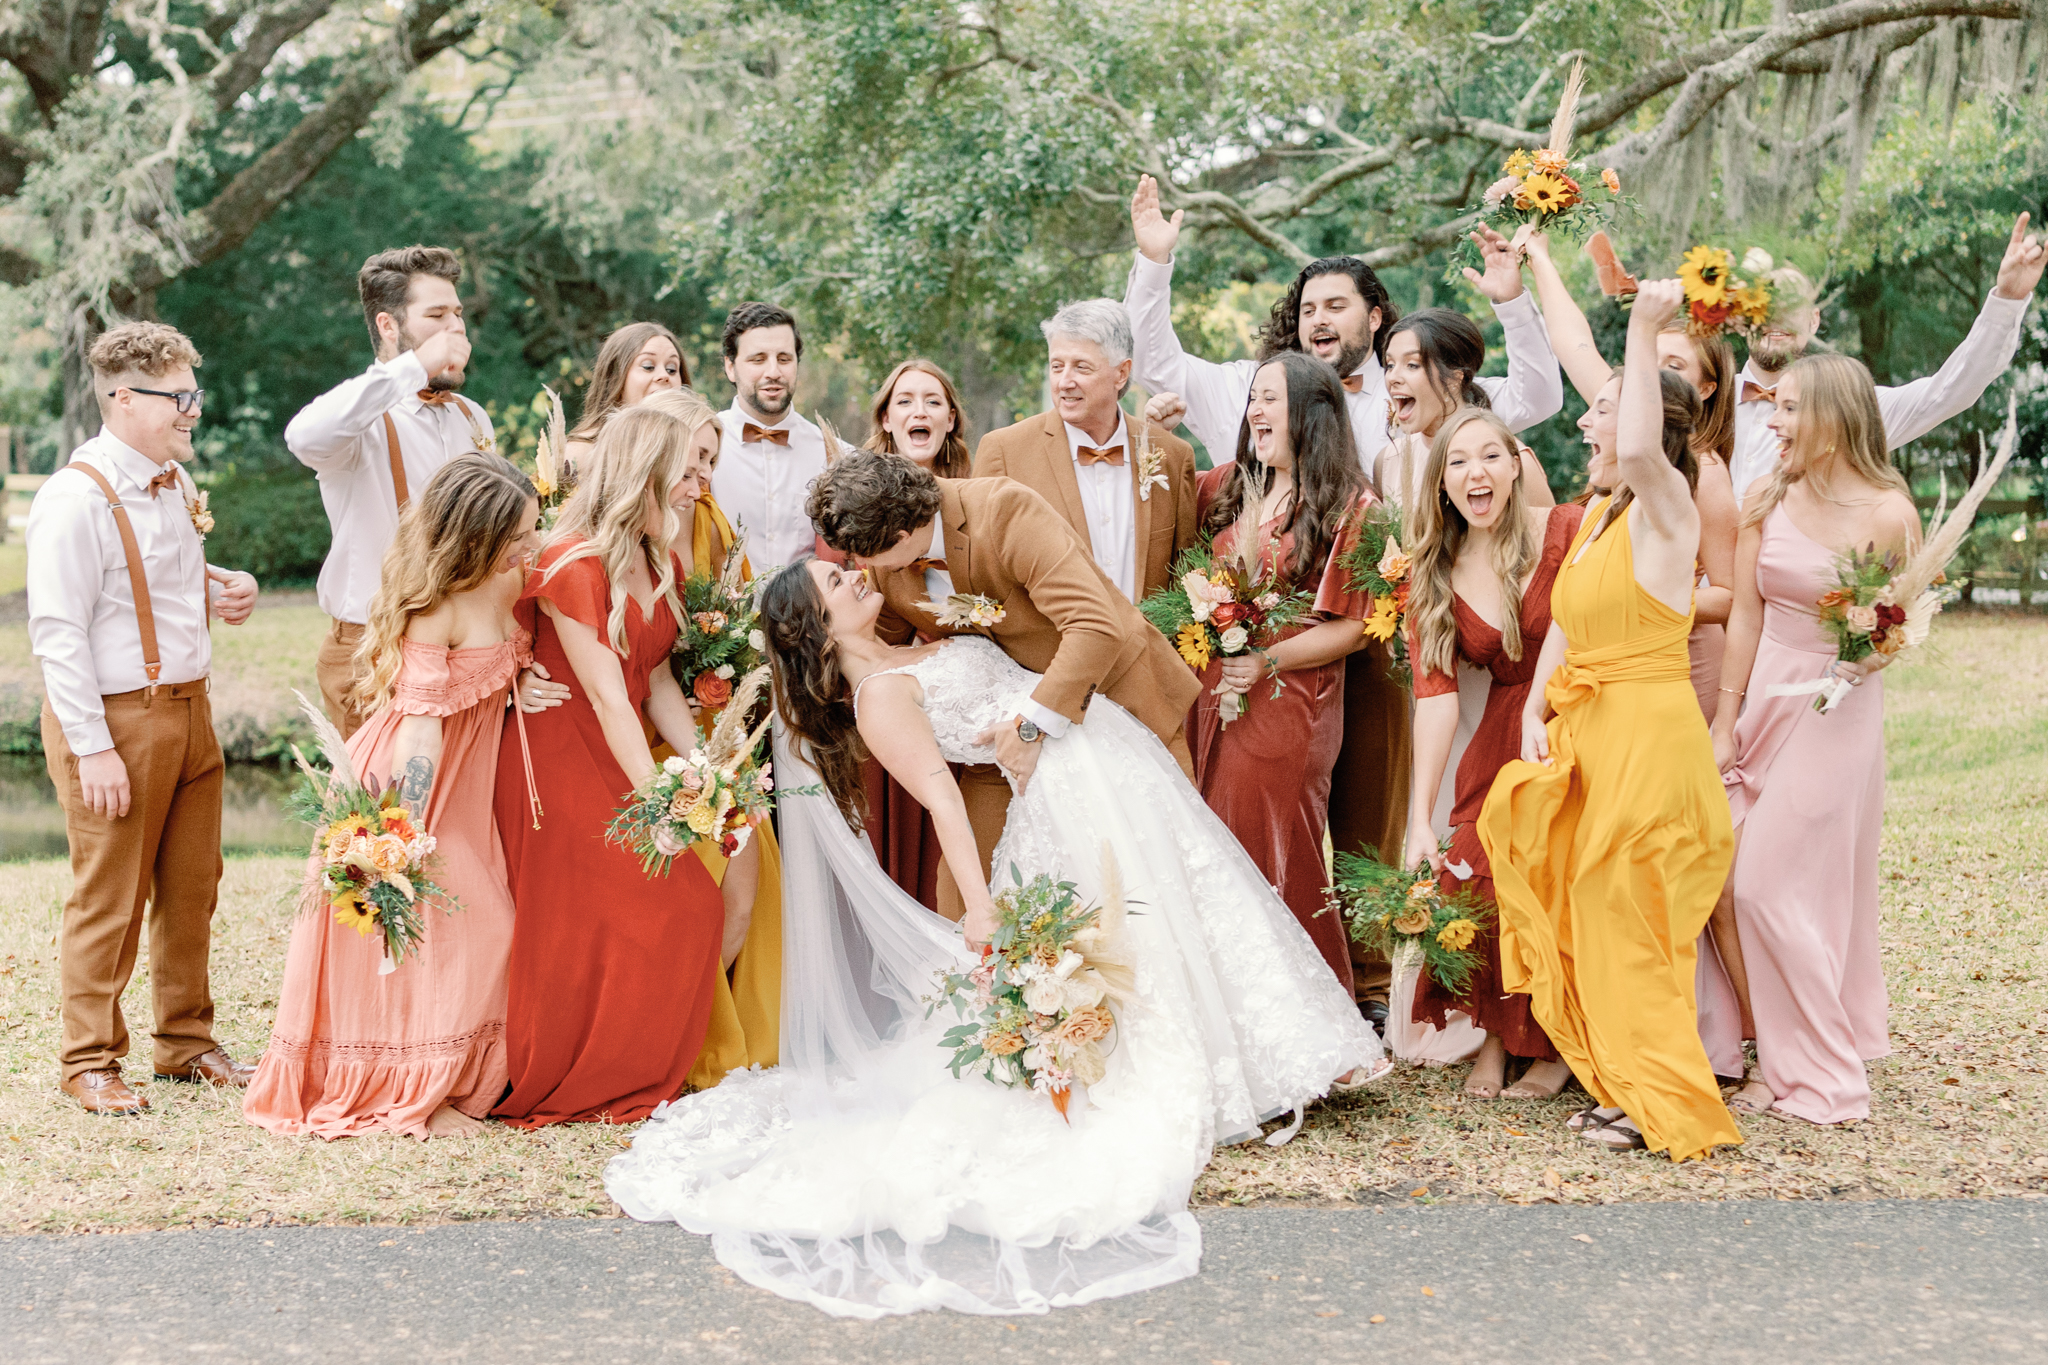 Bridal and groom party celebrating on their wedding day taken by Holly Ann Co. a St. Simons Wedding photographer